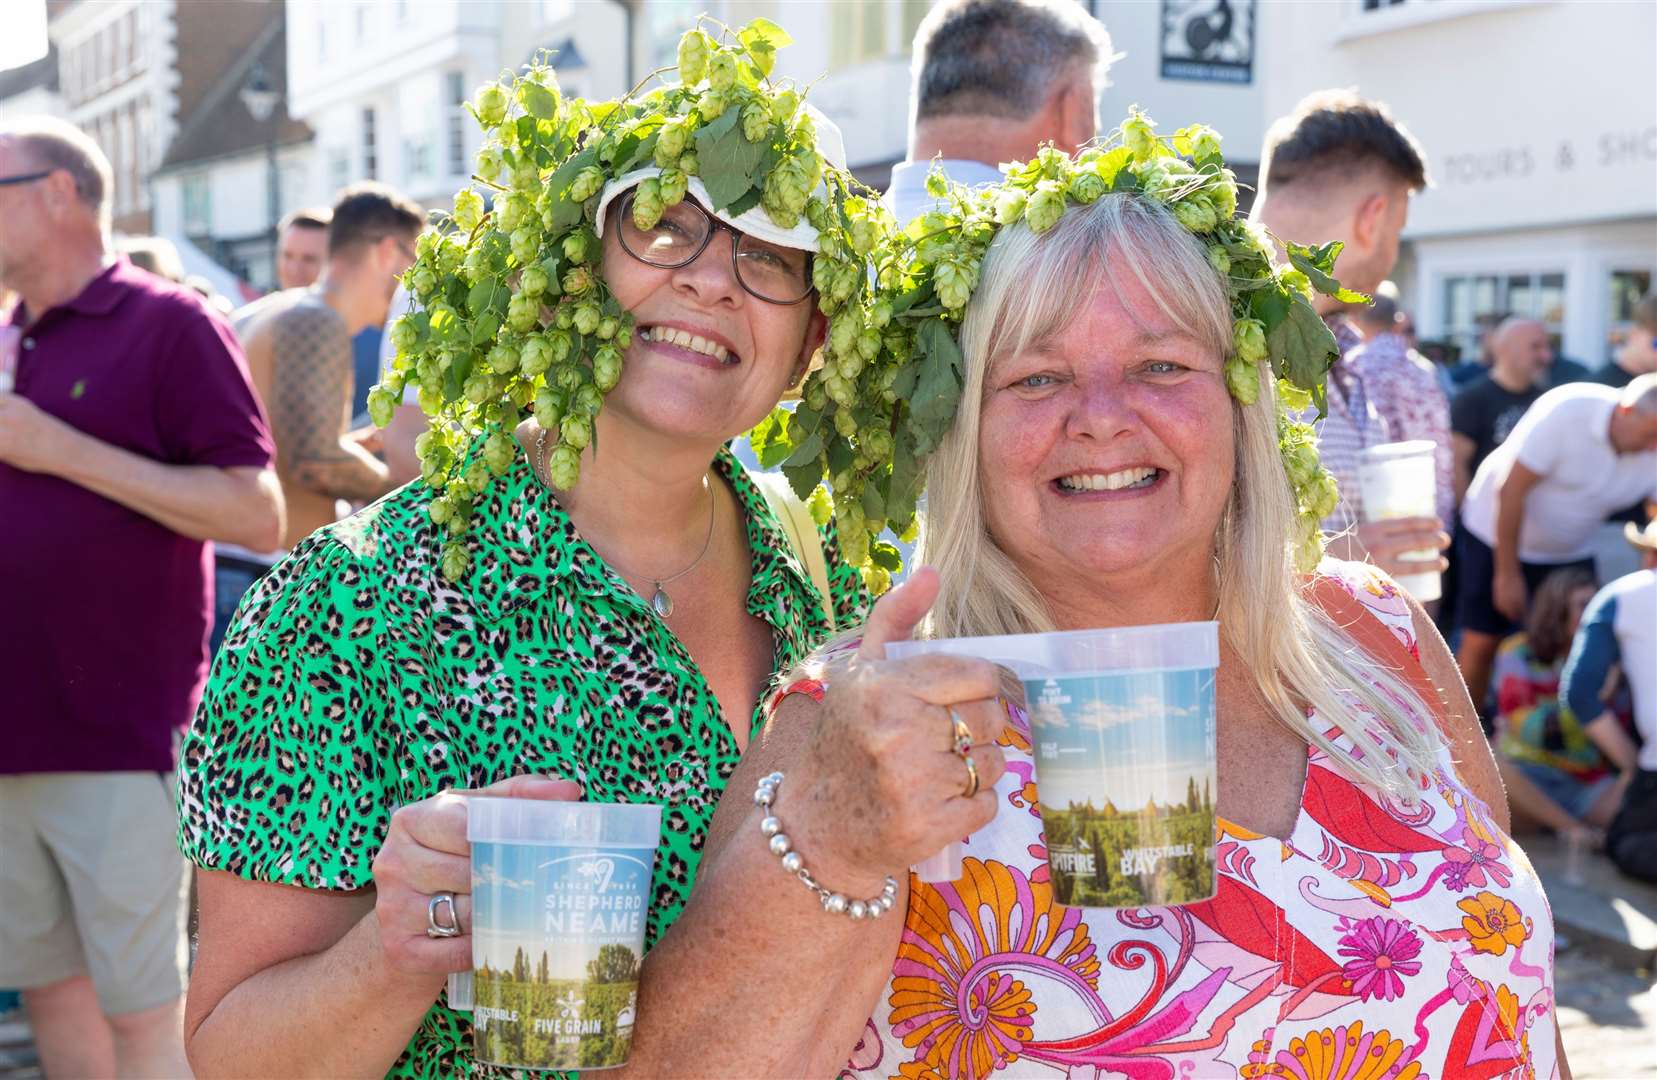 Faversham’s Hop Festival is a free beer and music festival that takes place in the town every year